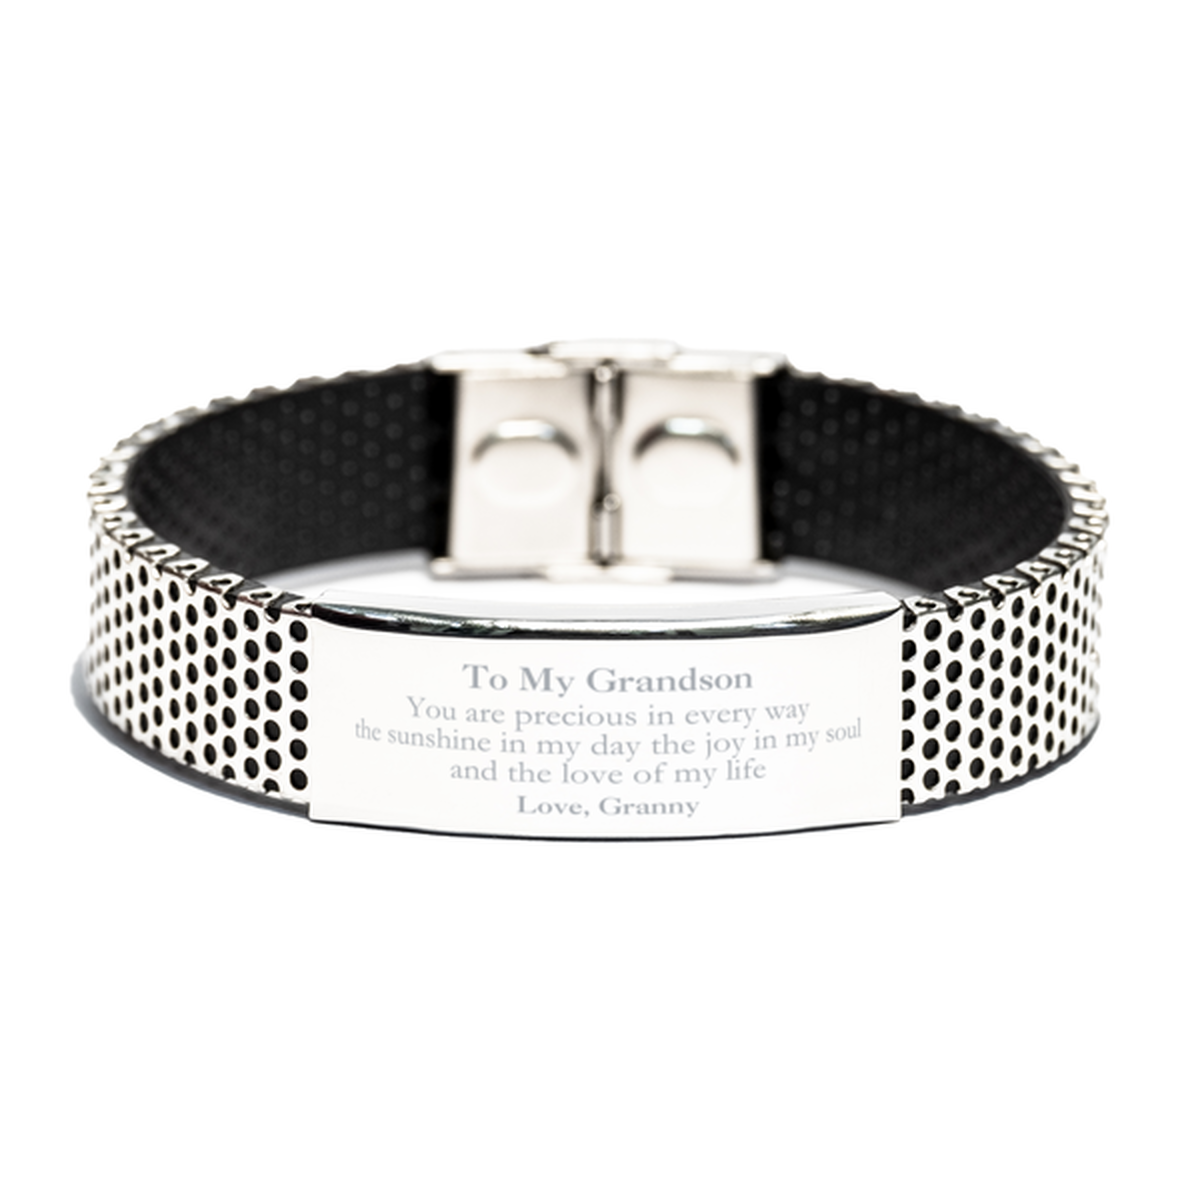 Graduation Gifts for Grandson Stainless Steel Bracelet Present from Granny, Christmas Grandson Birthday Gifts Grandson You are precious in every way the sunshine in my day. Love, Granny